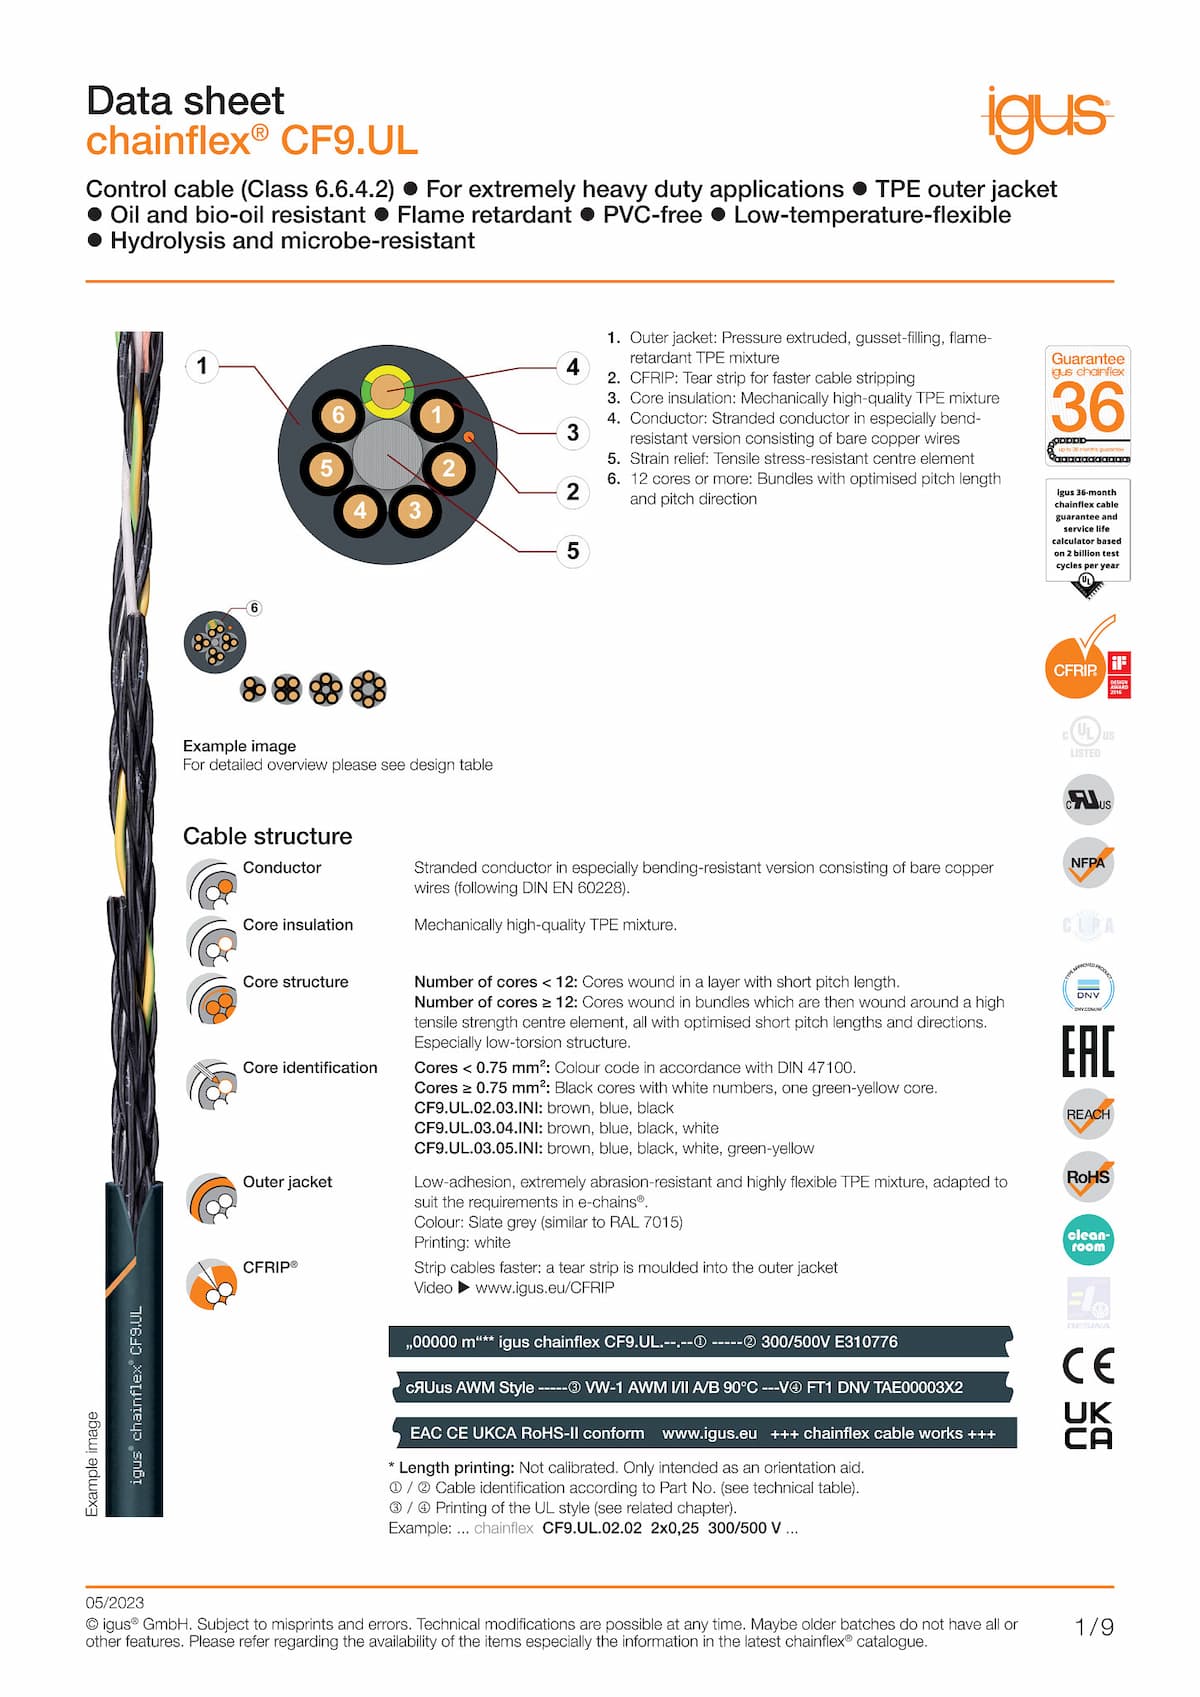 Technical data sheet chainflex® control cable CF9.UL